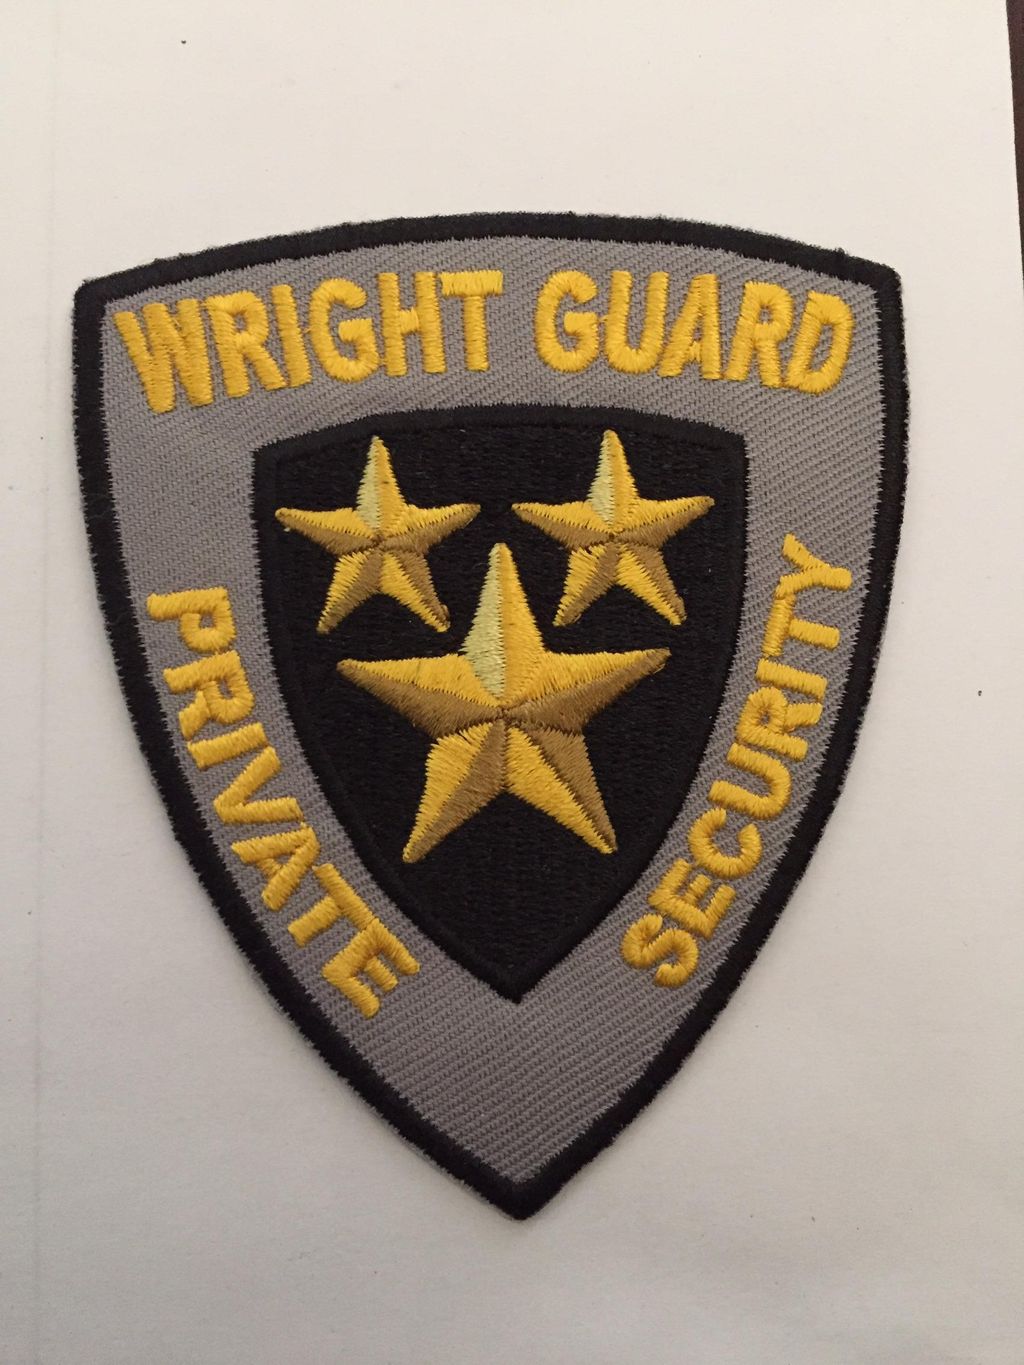 Wright Guard Security